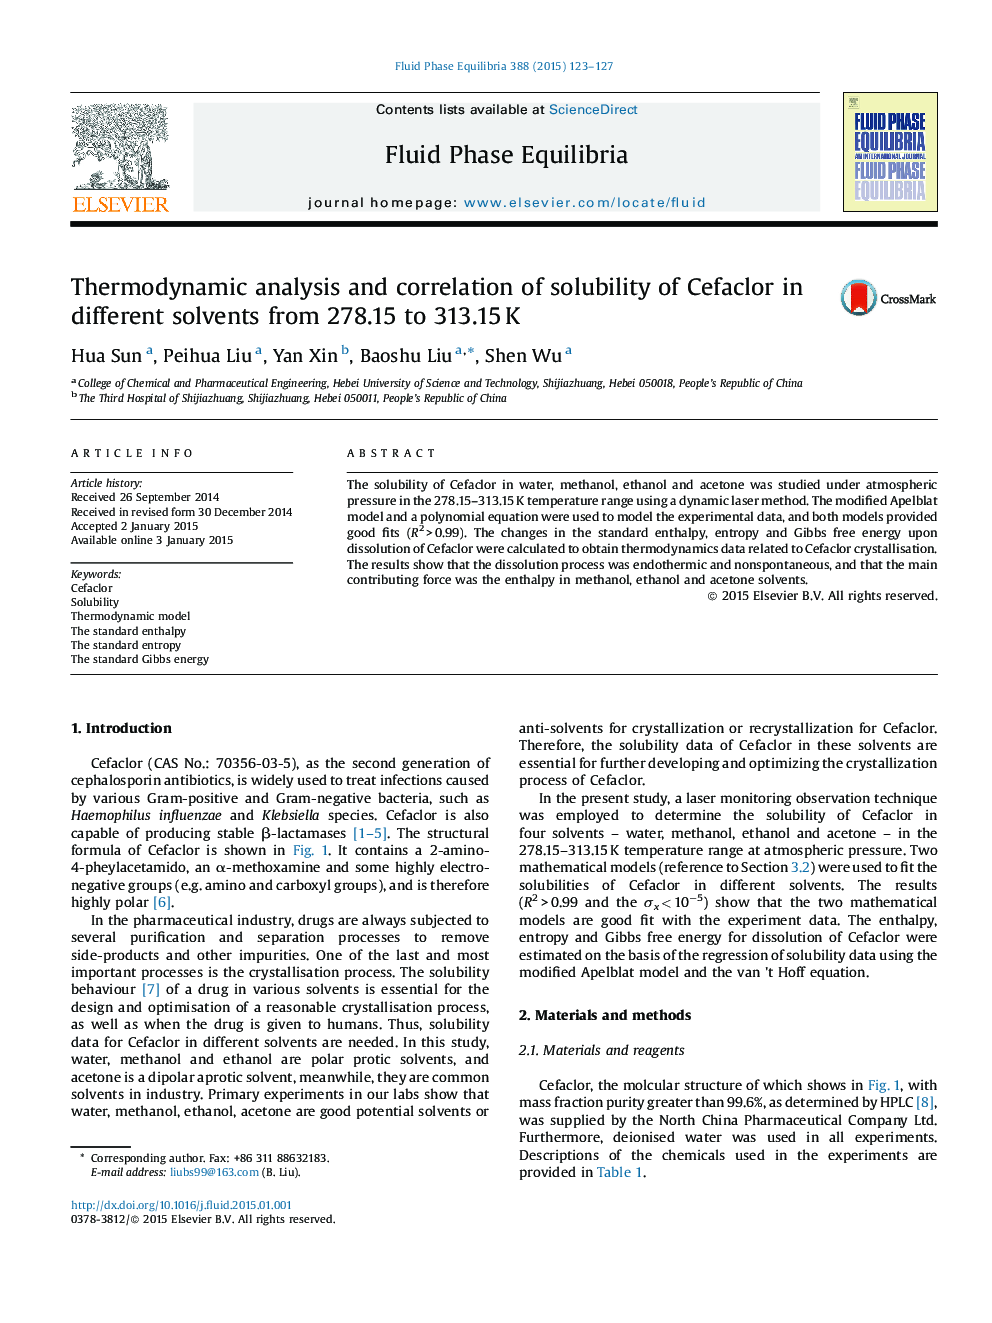 Thermodynamic analysis and correlation of solubility of Cefaclor in different solvents from 278.15 to 313.15 K